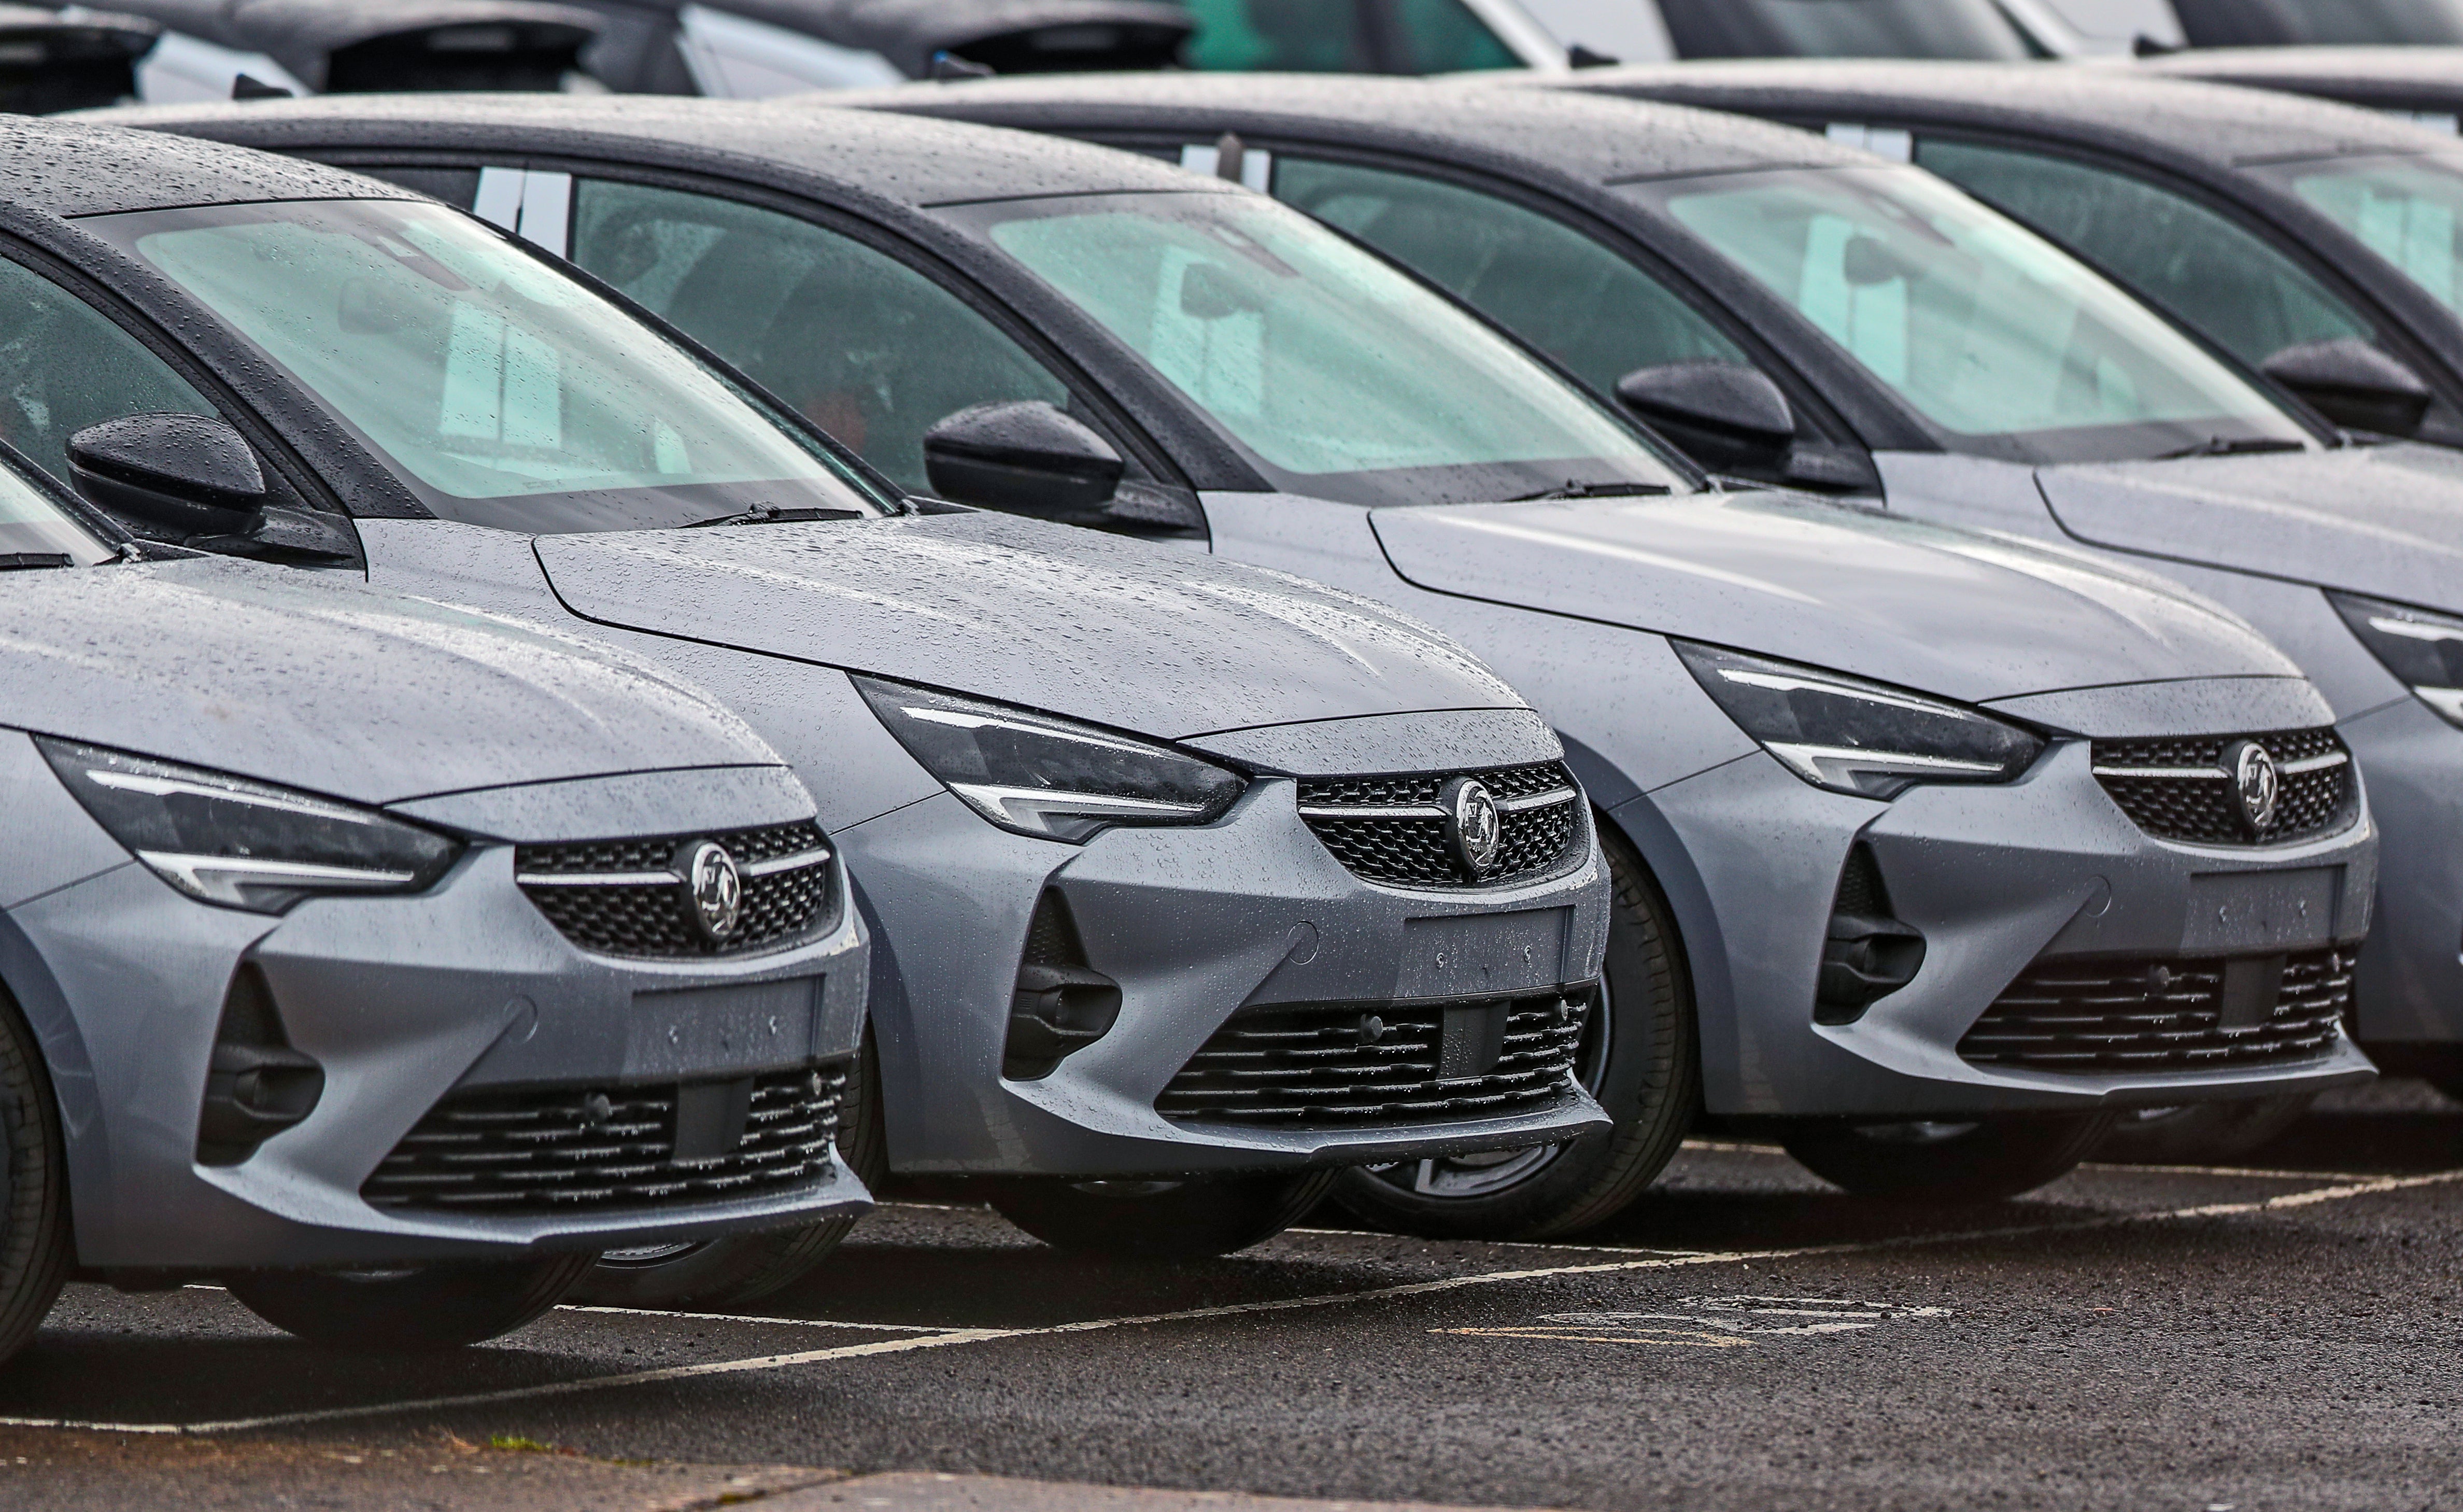 New figures show last month was the weakest July for new car sales since 1998 (Peter Byrne/PA)